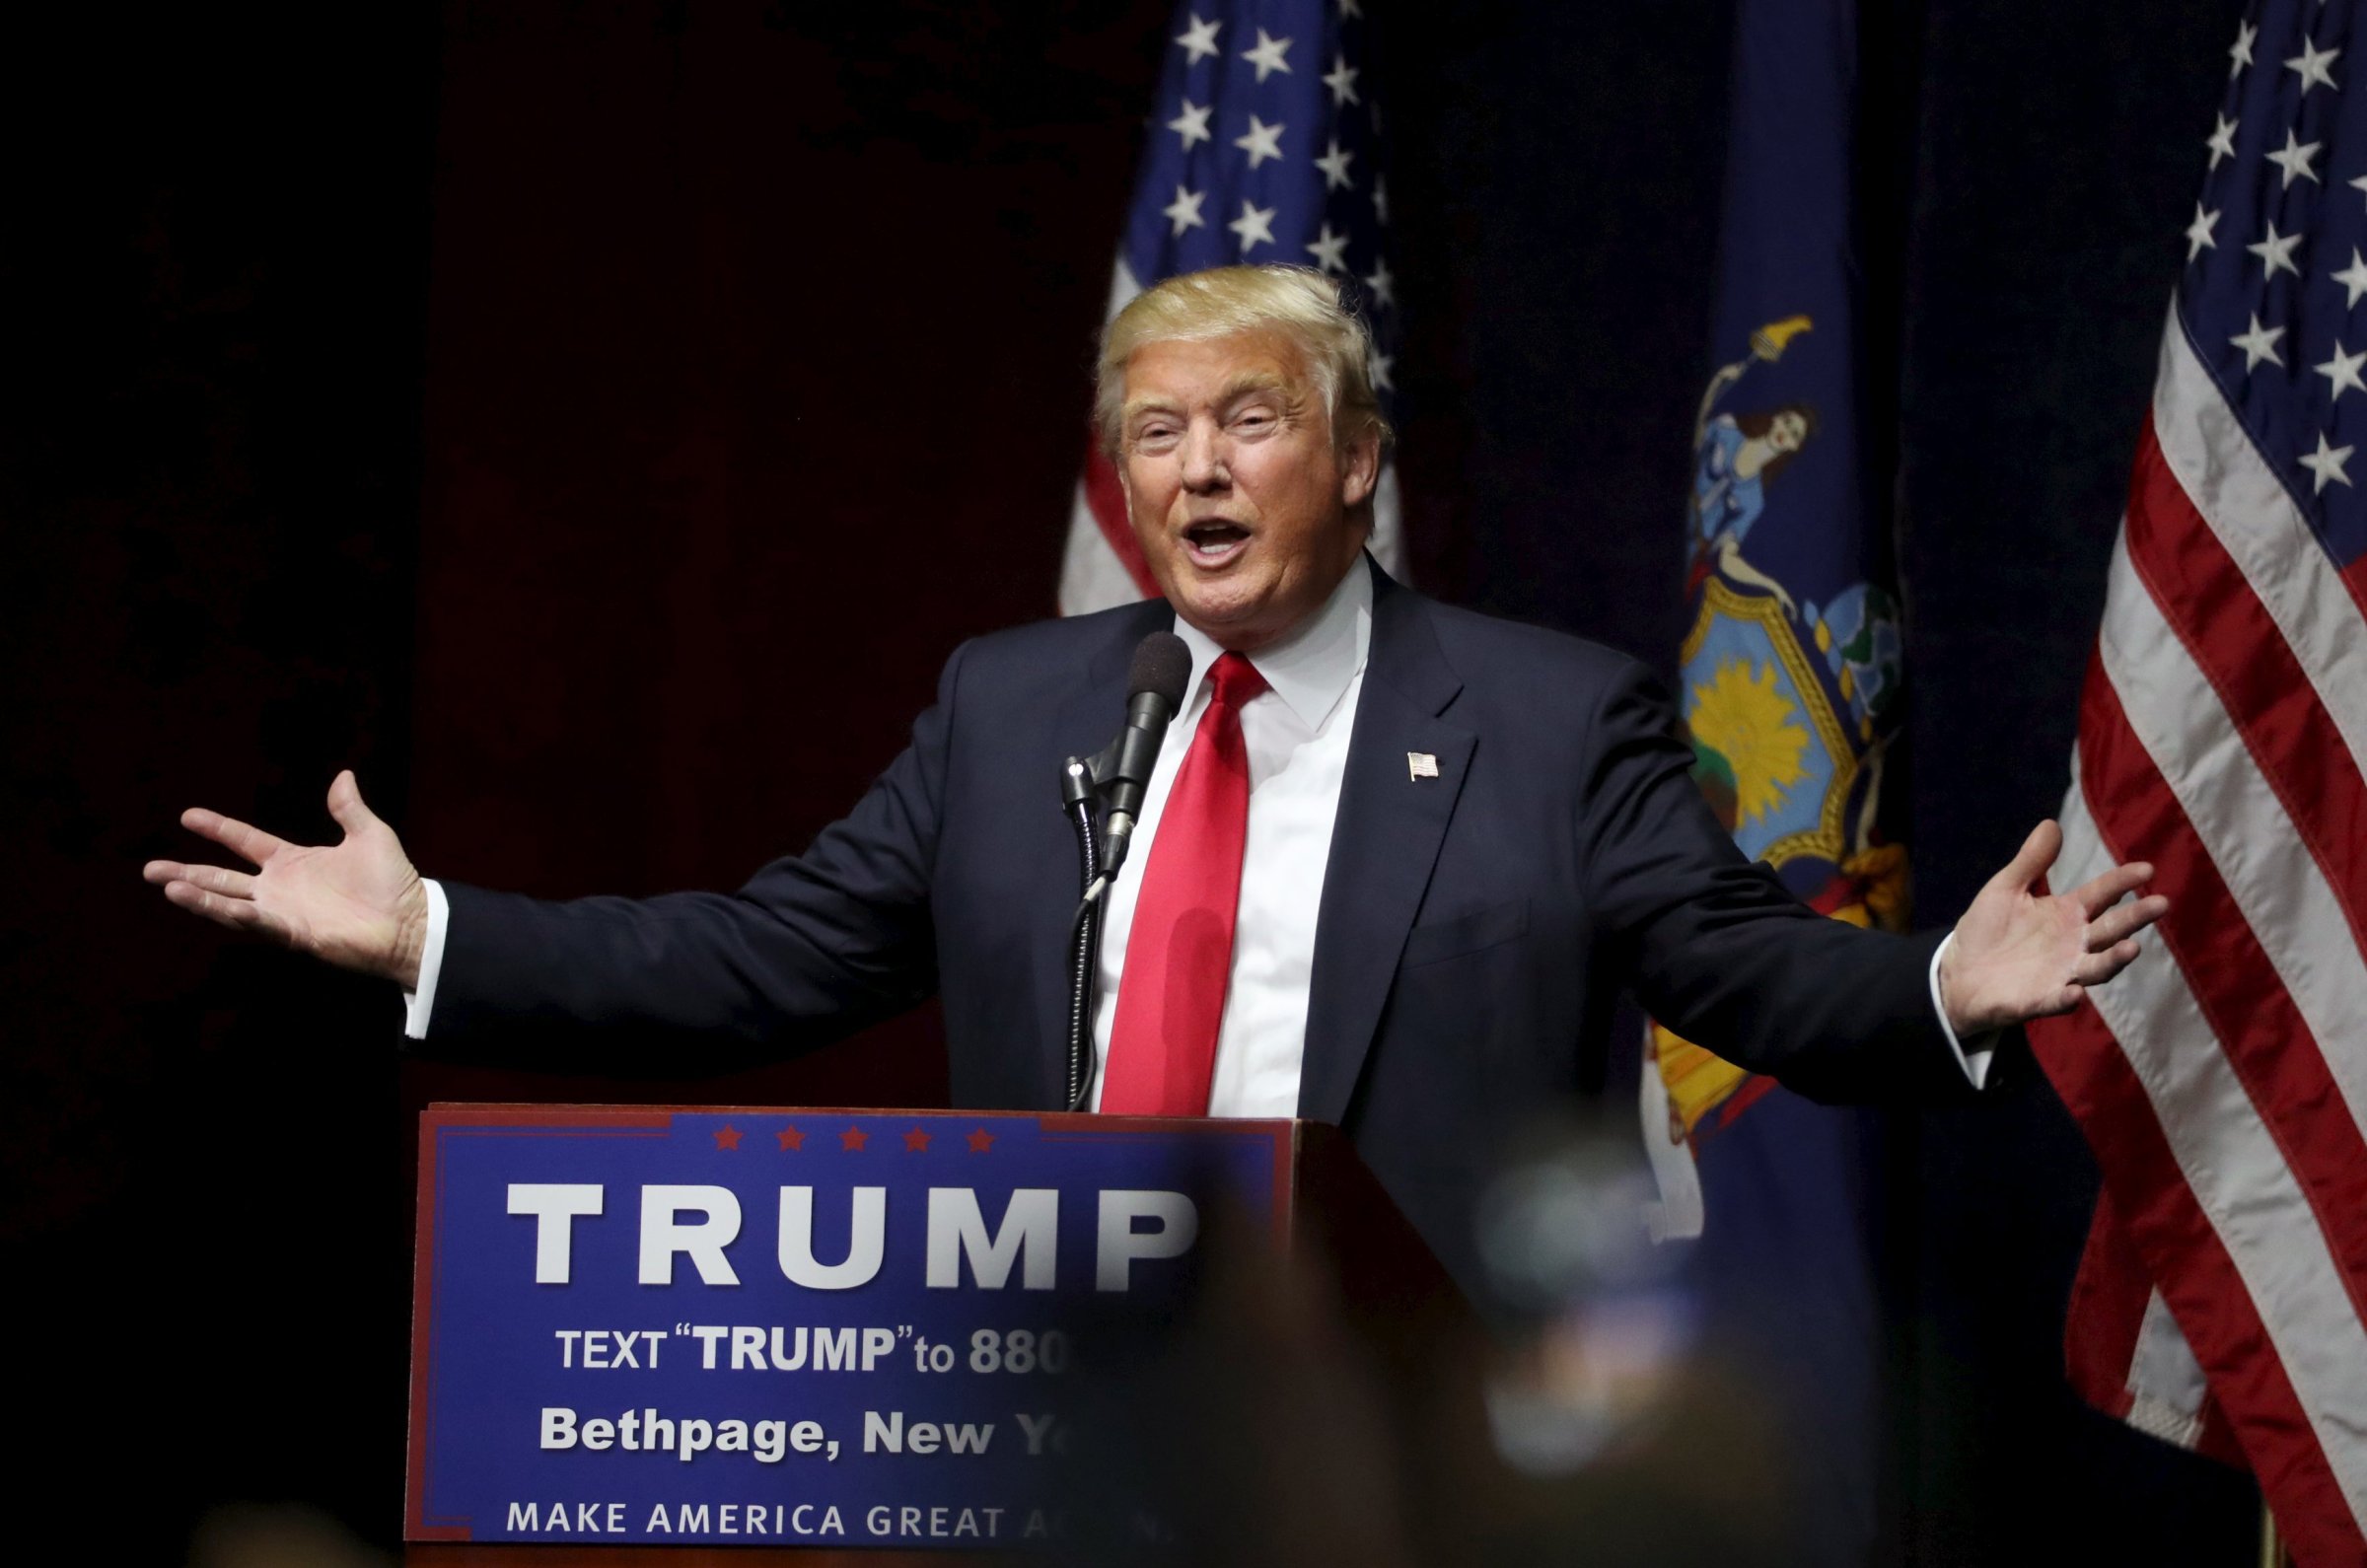 Republican presidential candidate Donald Trump speaks at a campaign rally in Bethpage, New York on April 6, 2016.